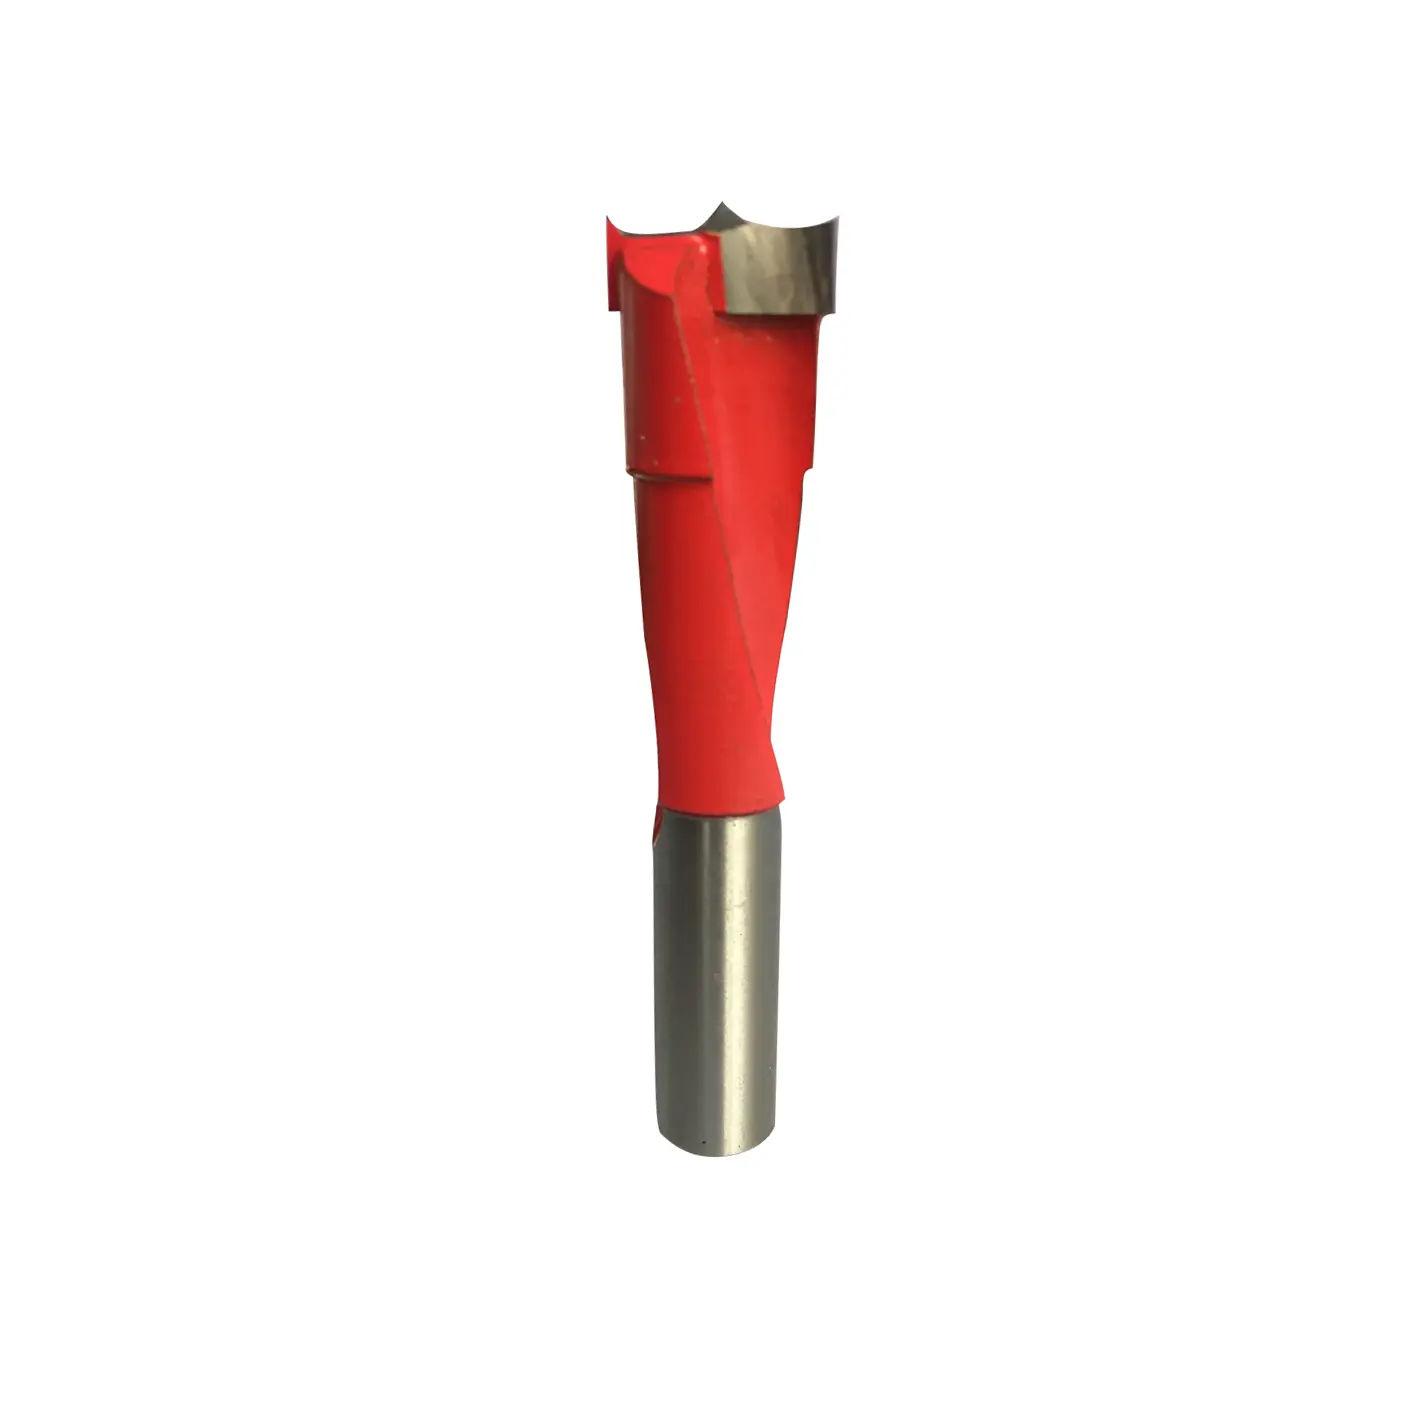 Carbide Blind Through Dowel Drill Bits Spindle Moulder Cutter Head For Woodworking Machine